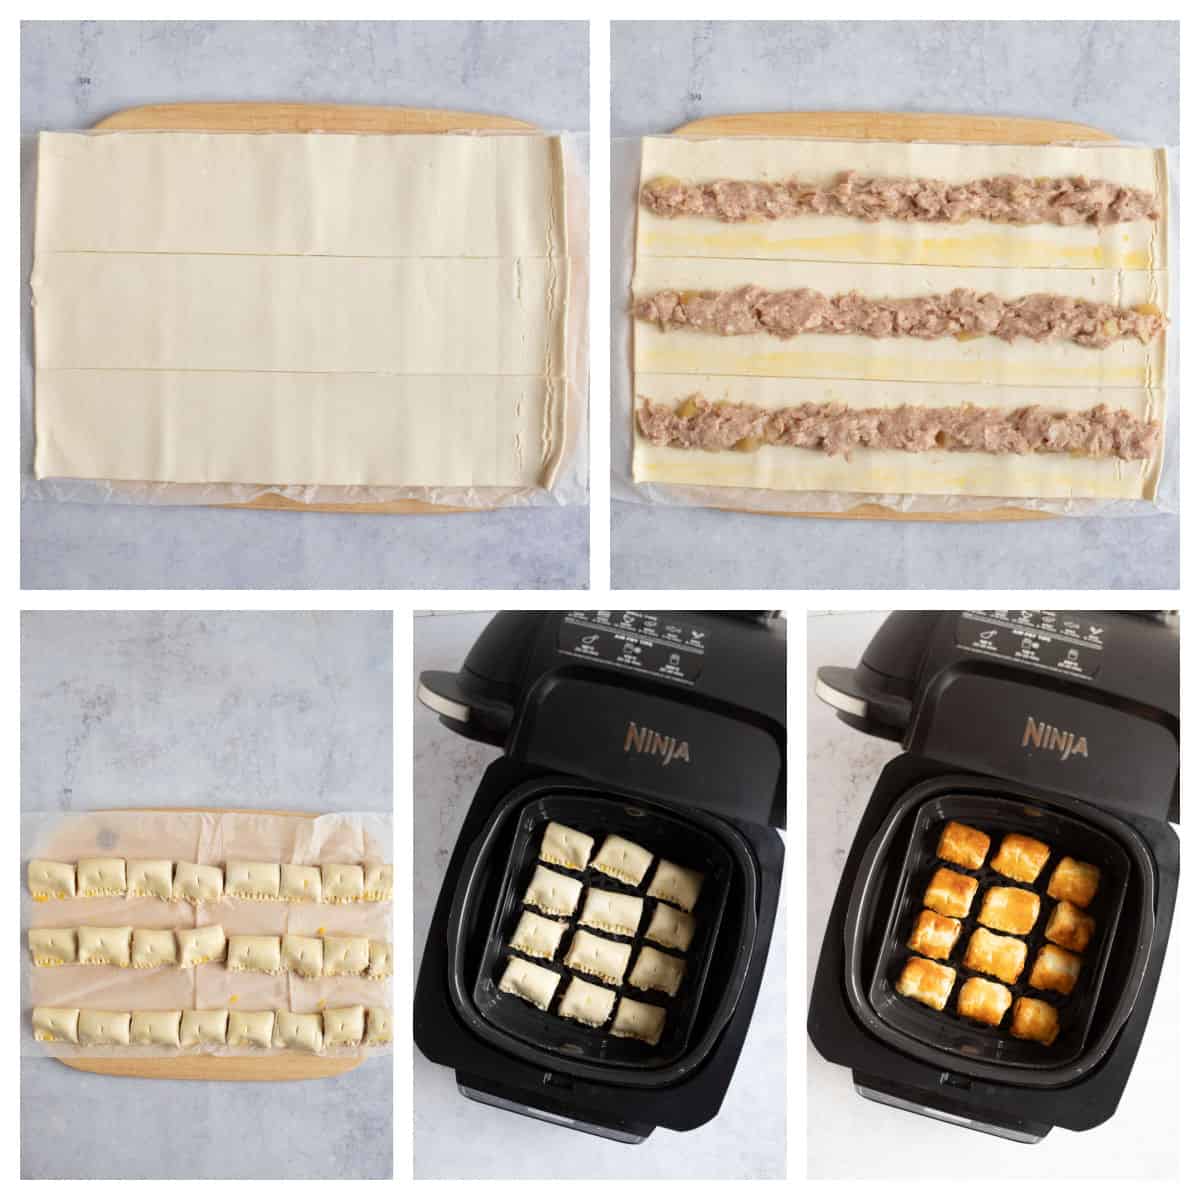 Step by step process photos for making and cooking sausage rolls in an air fryer.